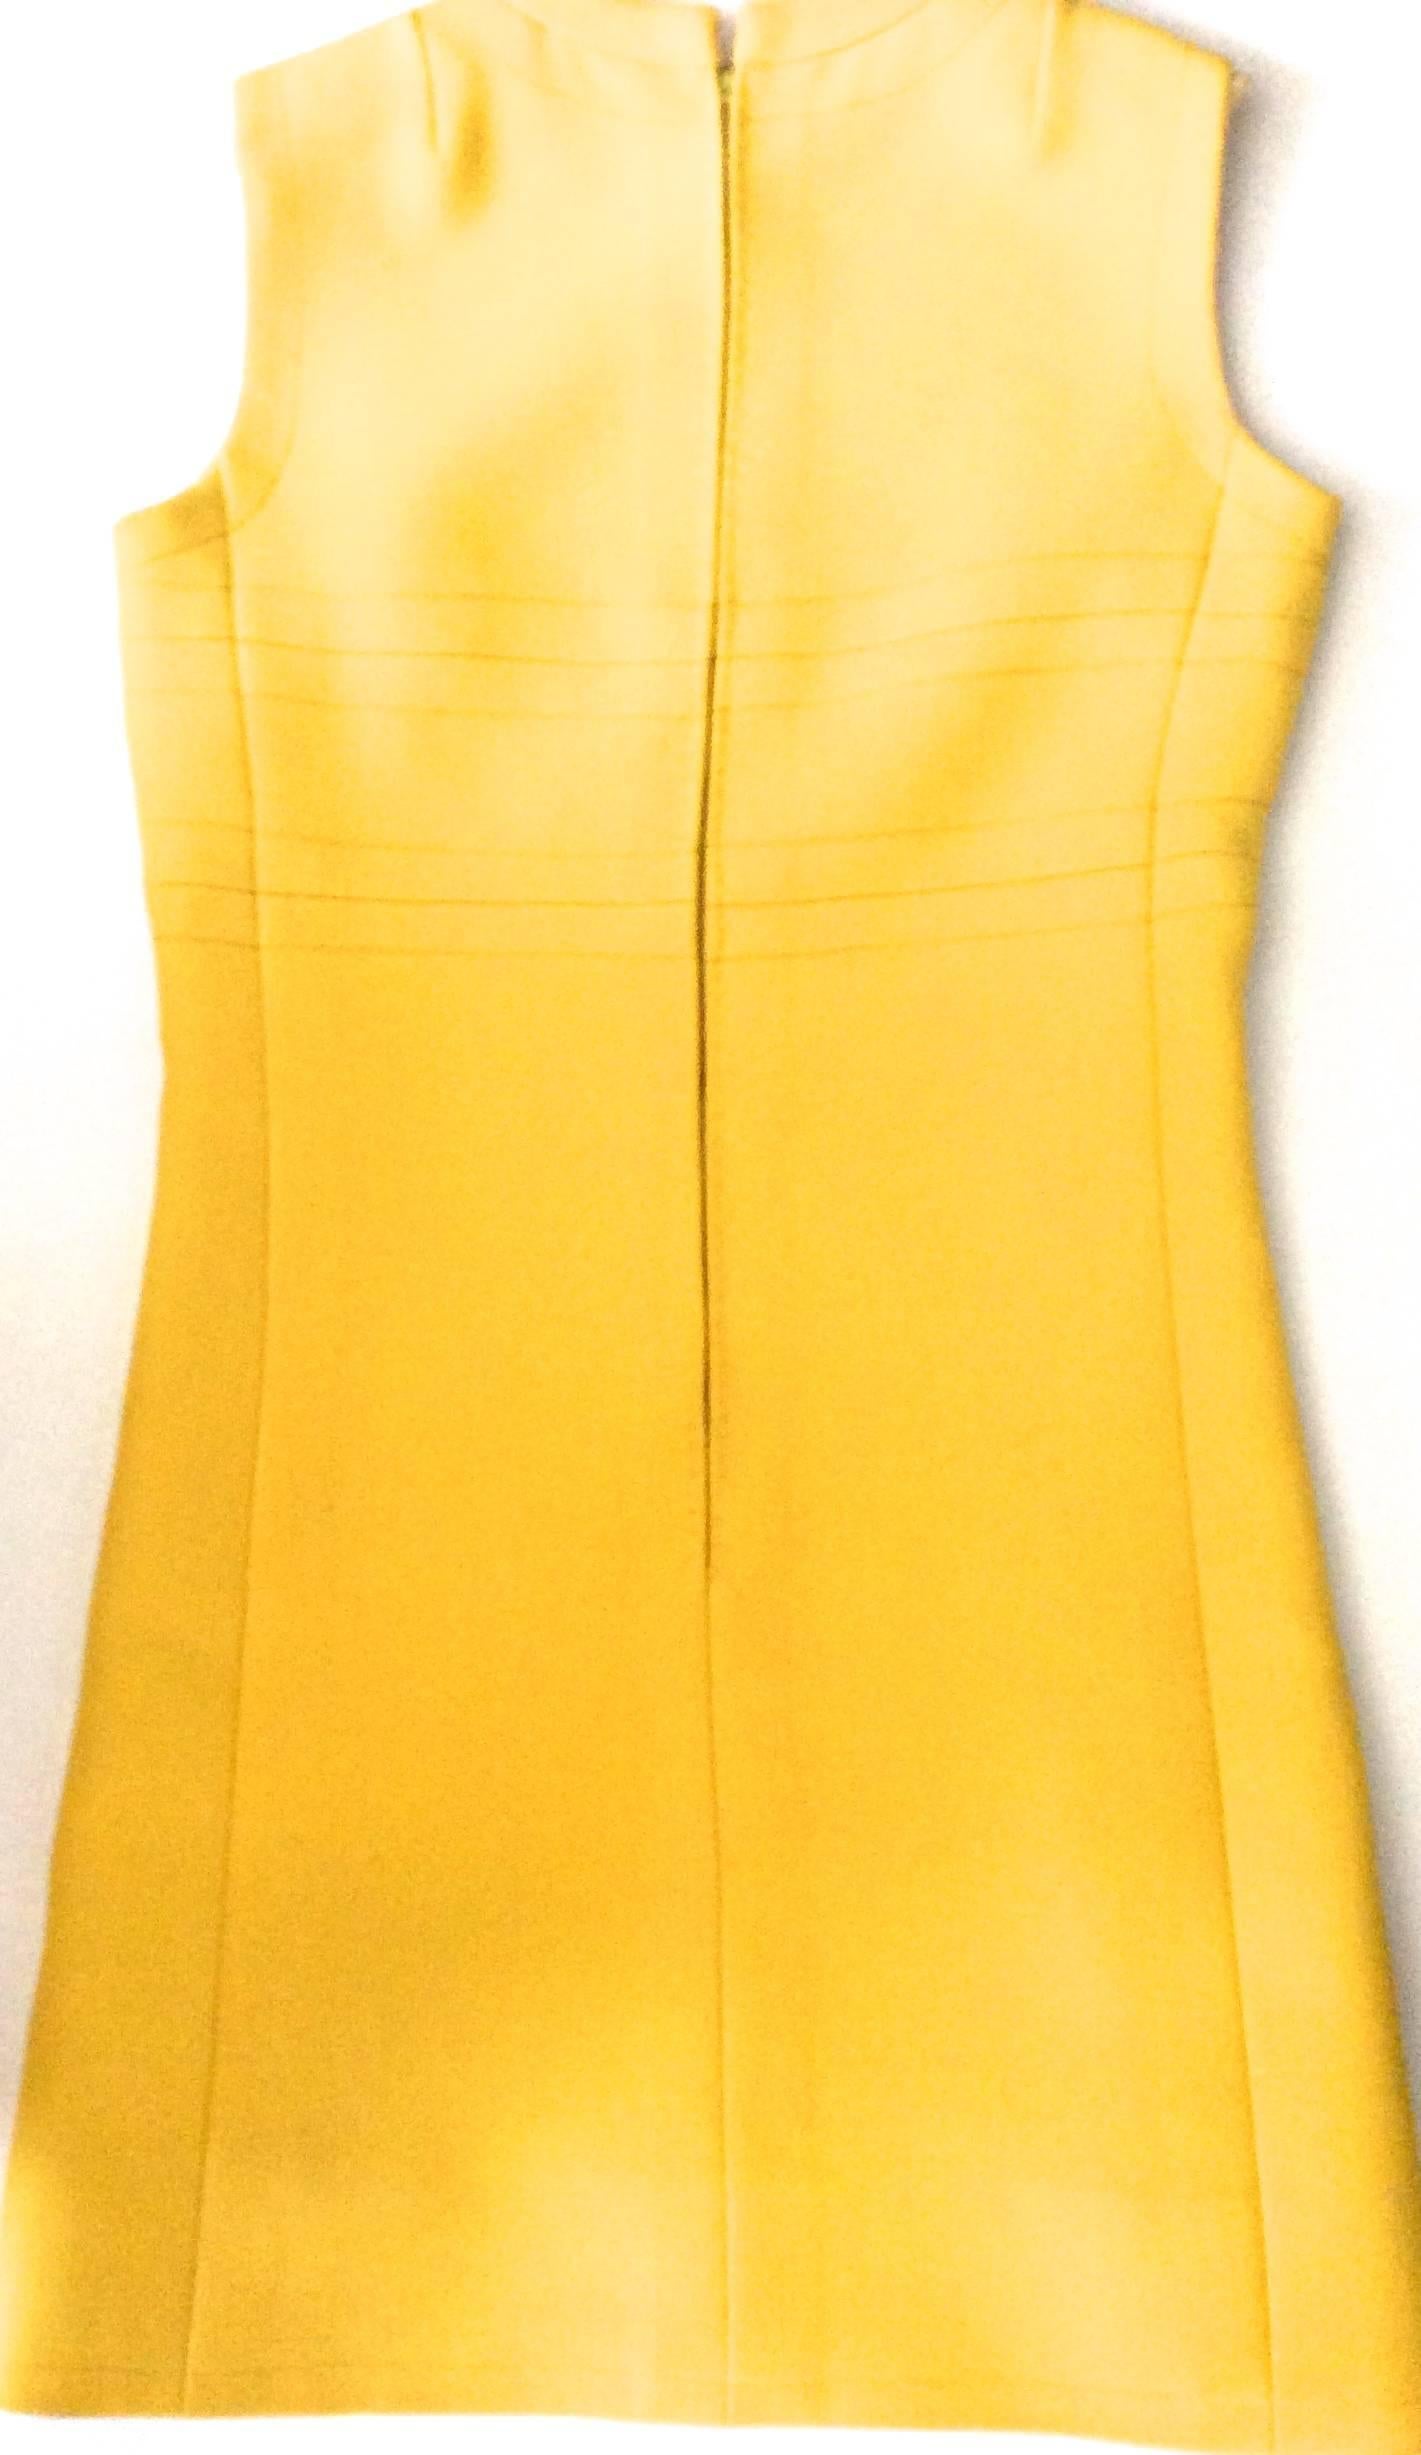 Presented here is a vintage 1960's yellow sleeveless a-line dress. The dress is wool with cream colored silk lining. The dress is carefully stitched throughout the entirety of the dress. The dress has beautifully stitched cross sections sewn in